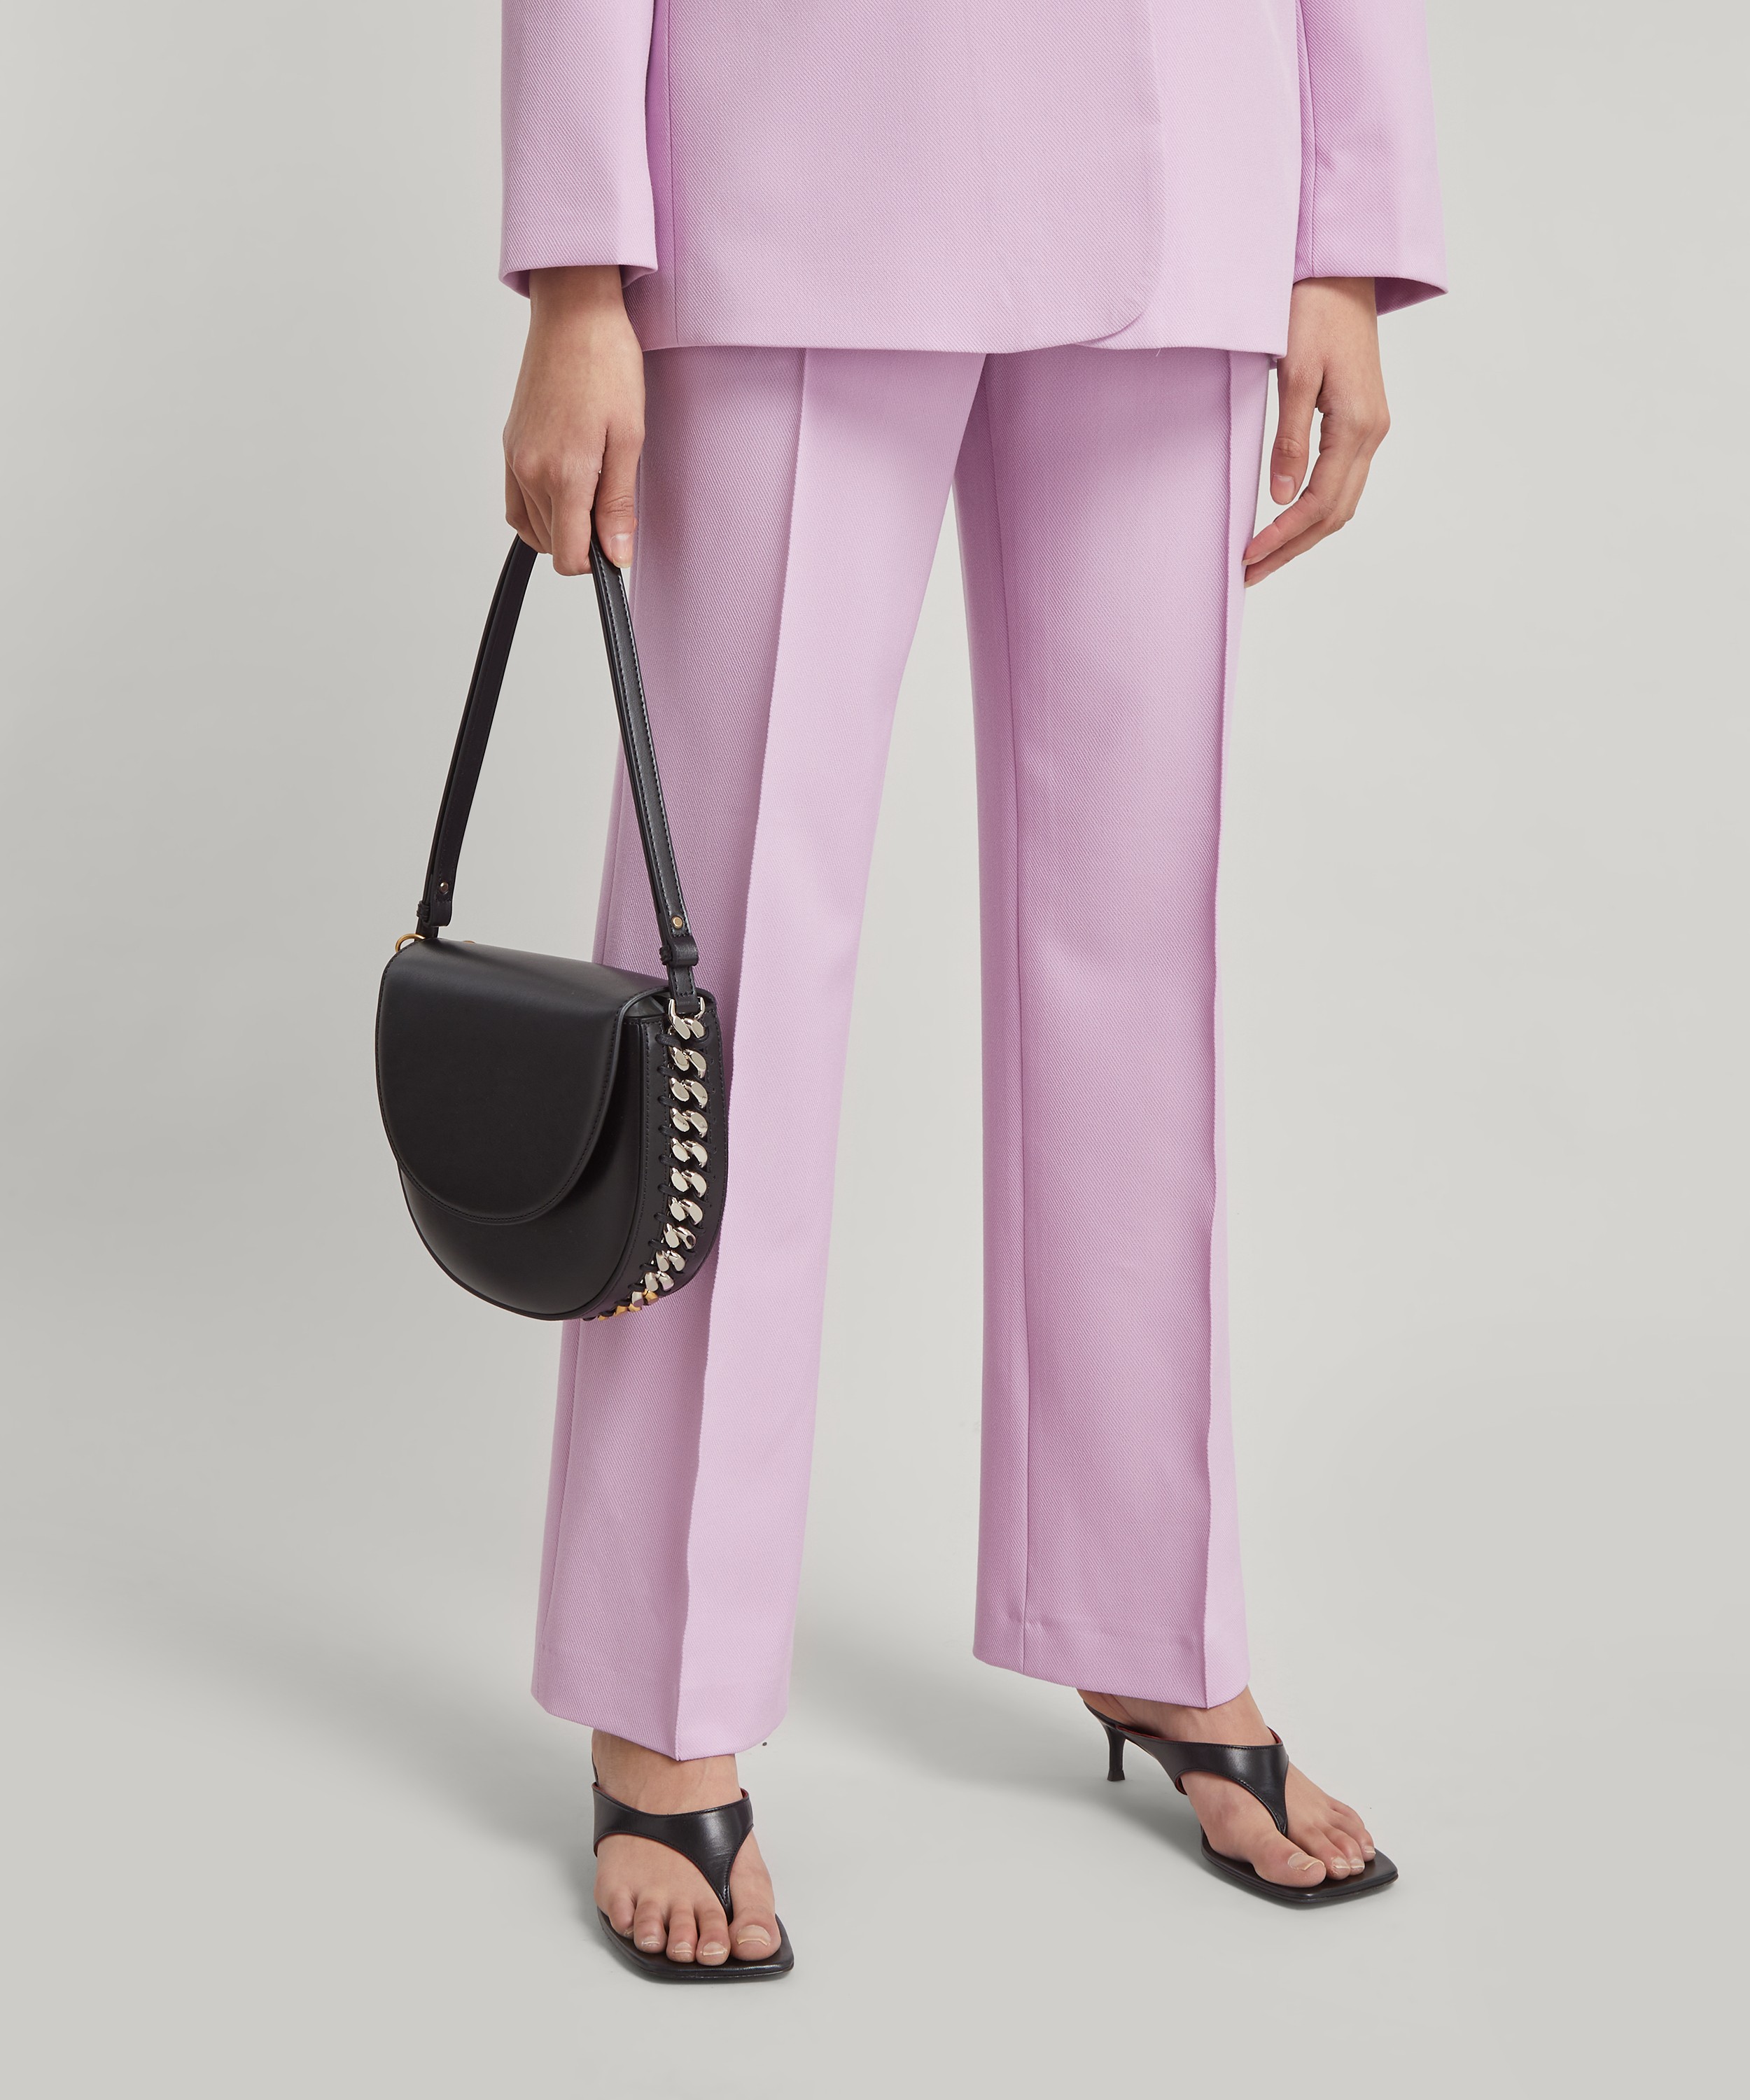 Stella McCartney on X: Crafted from soft alter-nappa and